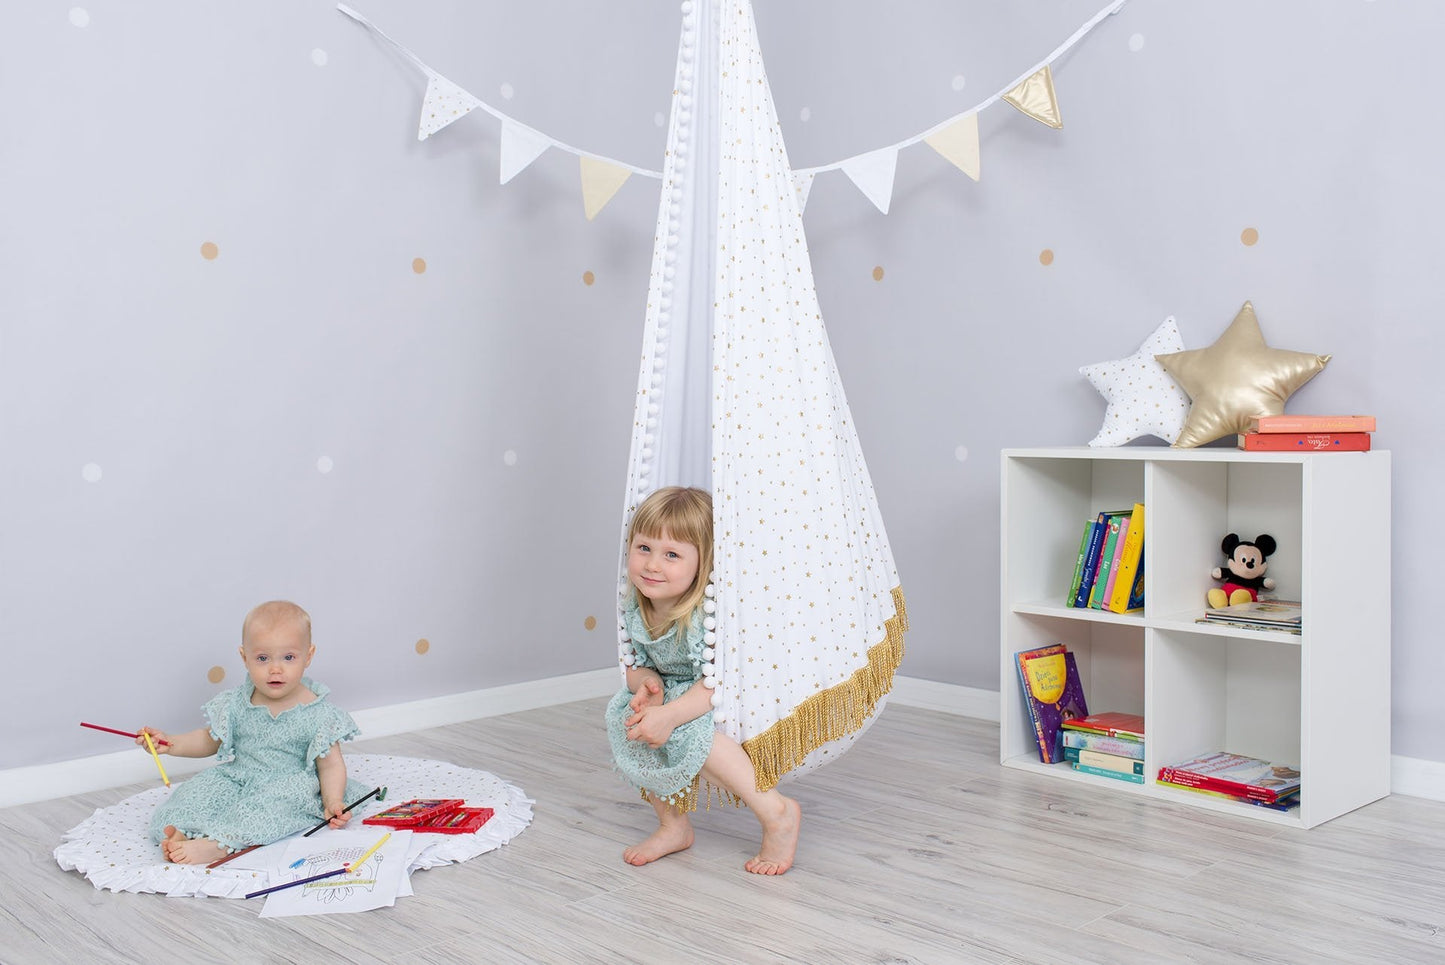 Hanging Cocoon Swing Star With Tassels